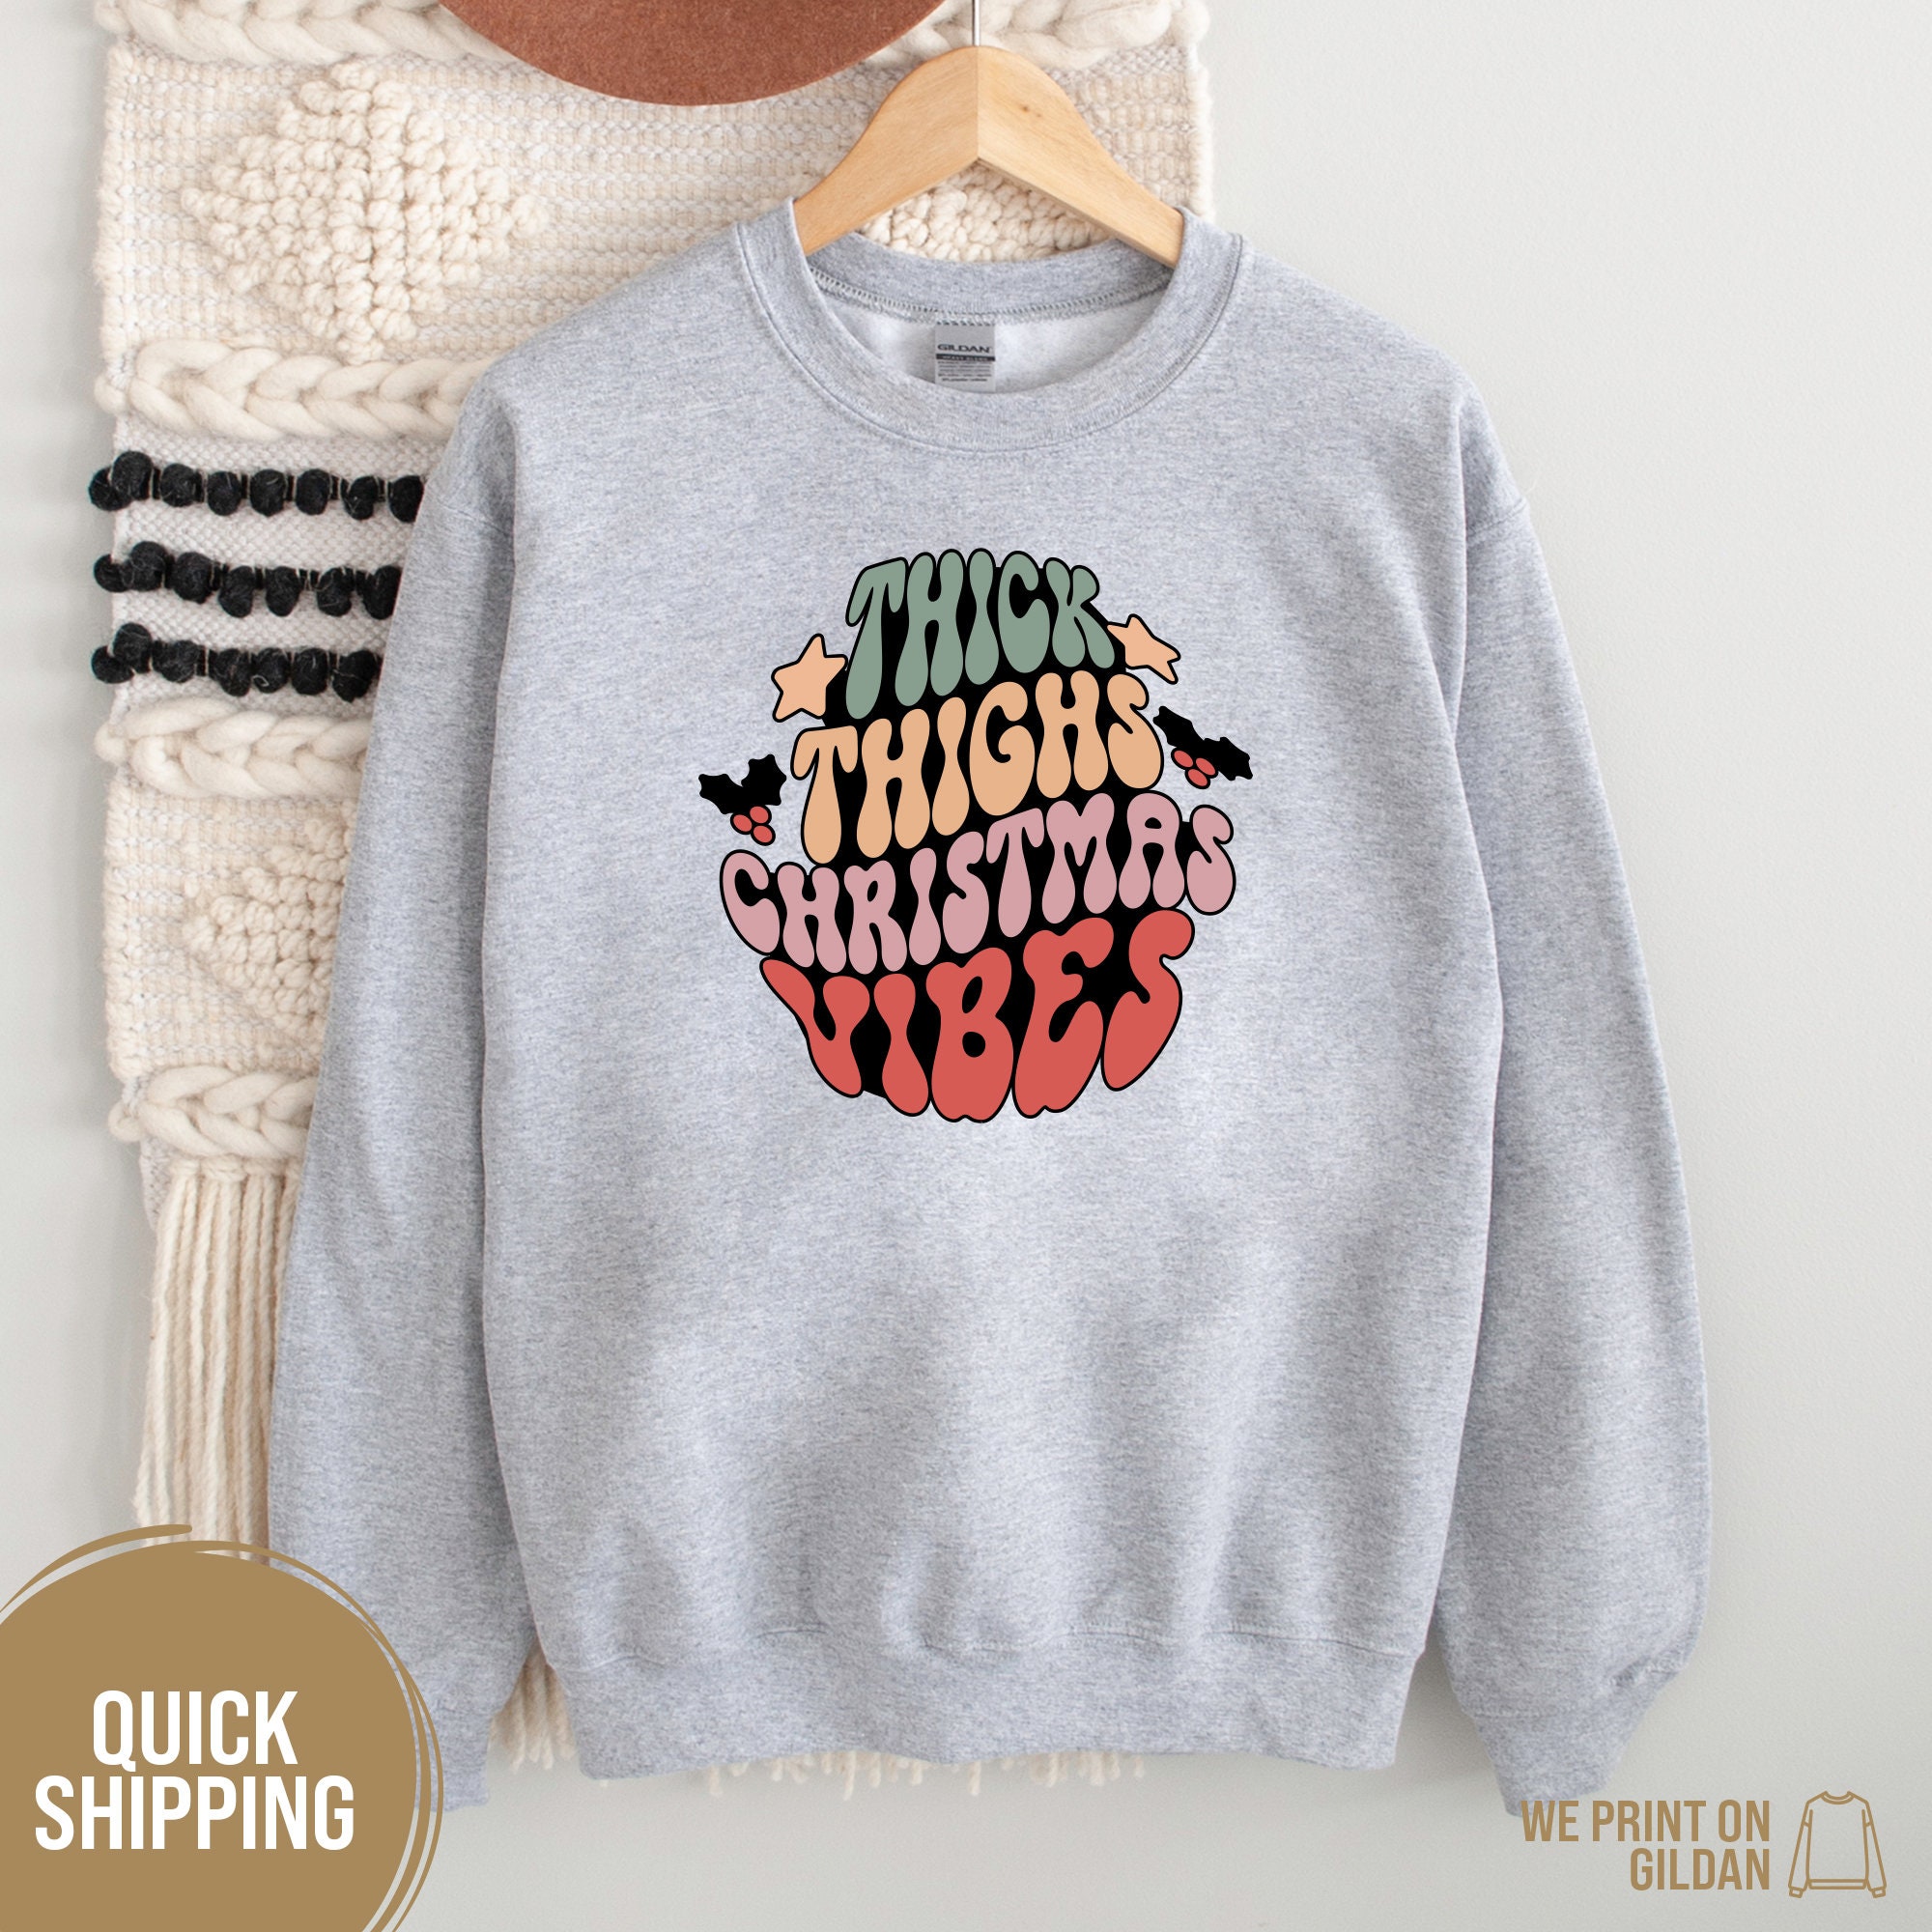 Retro Christmas Vibes Sweatshirt for a Funny and Cute Y2K Clothing Style